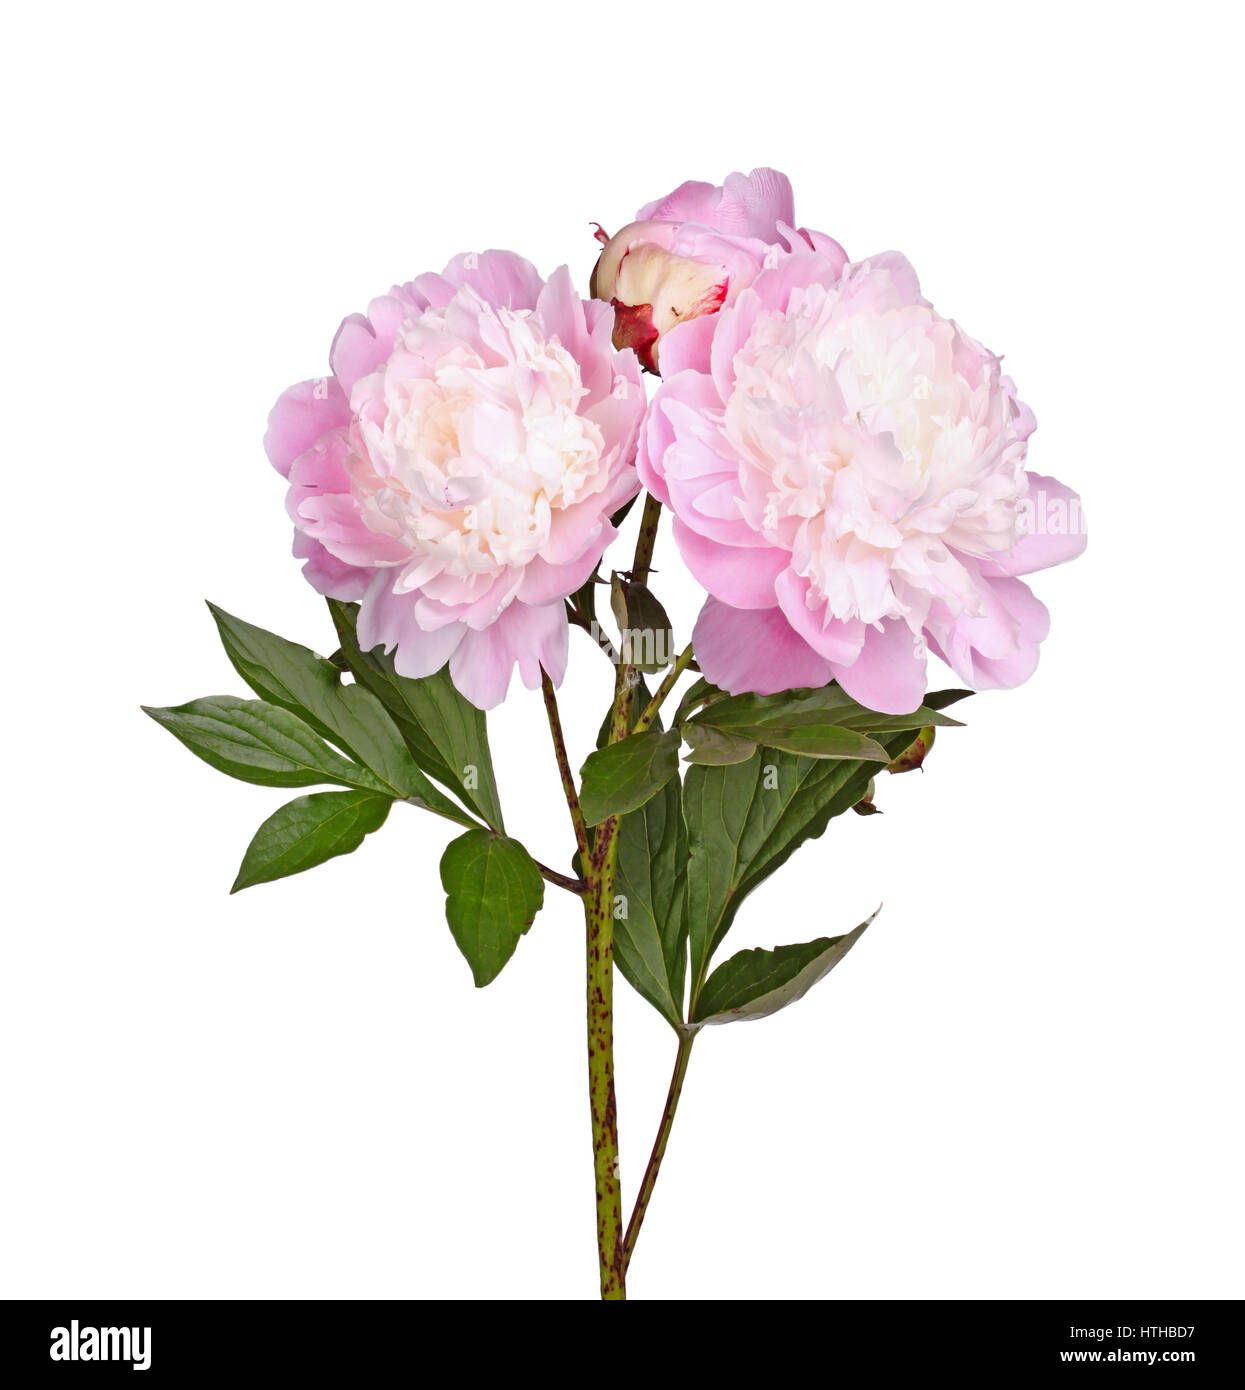 Stem, leaves and flowers of a pink and white, anemone-type peony against a white background Stock Photo